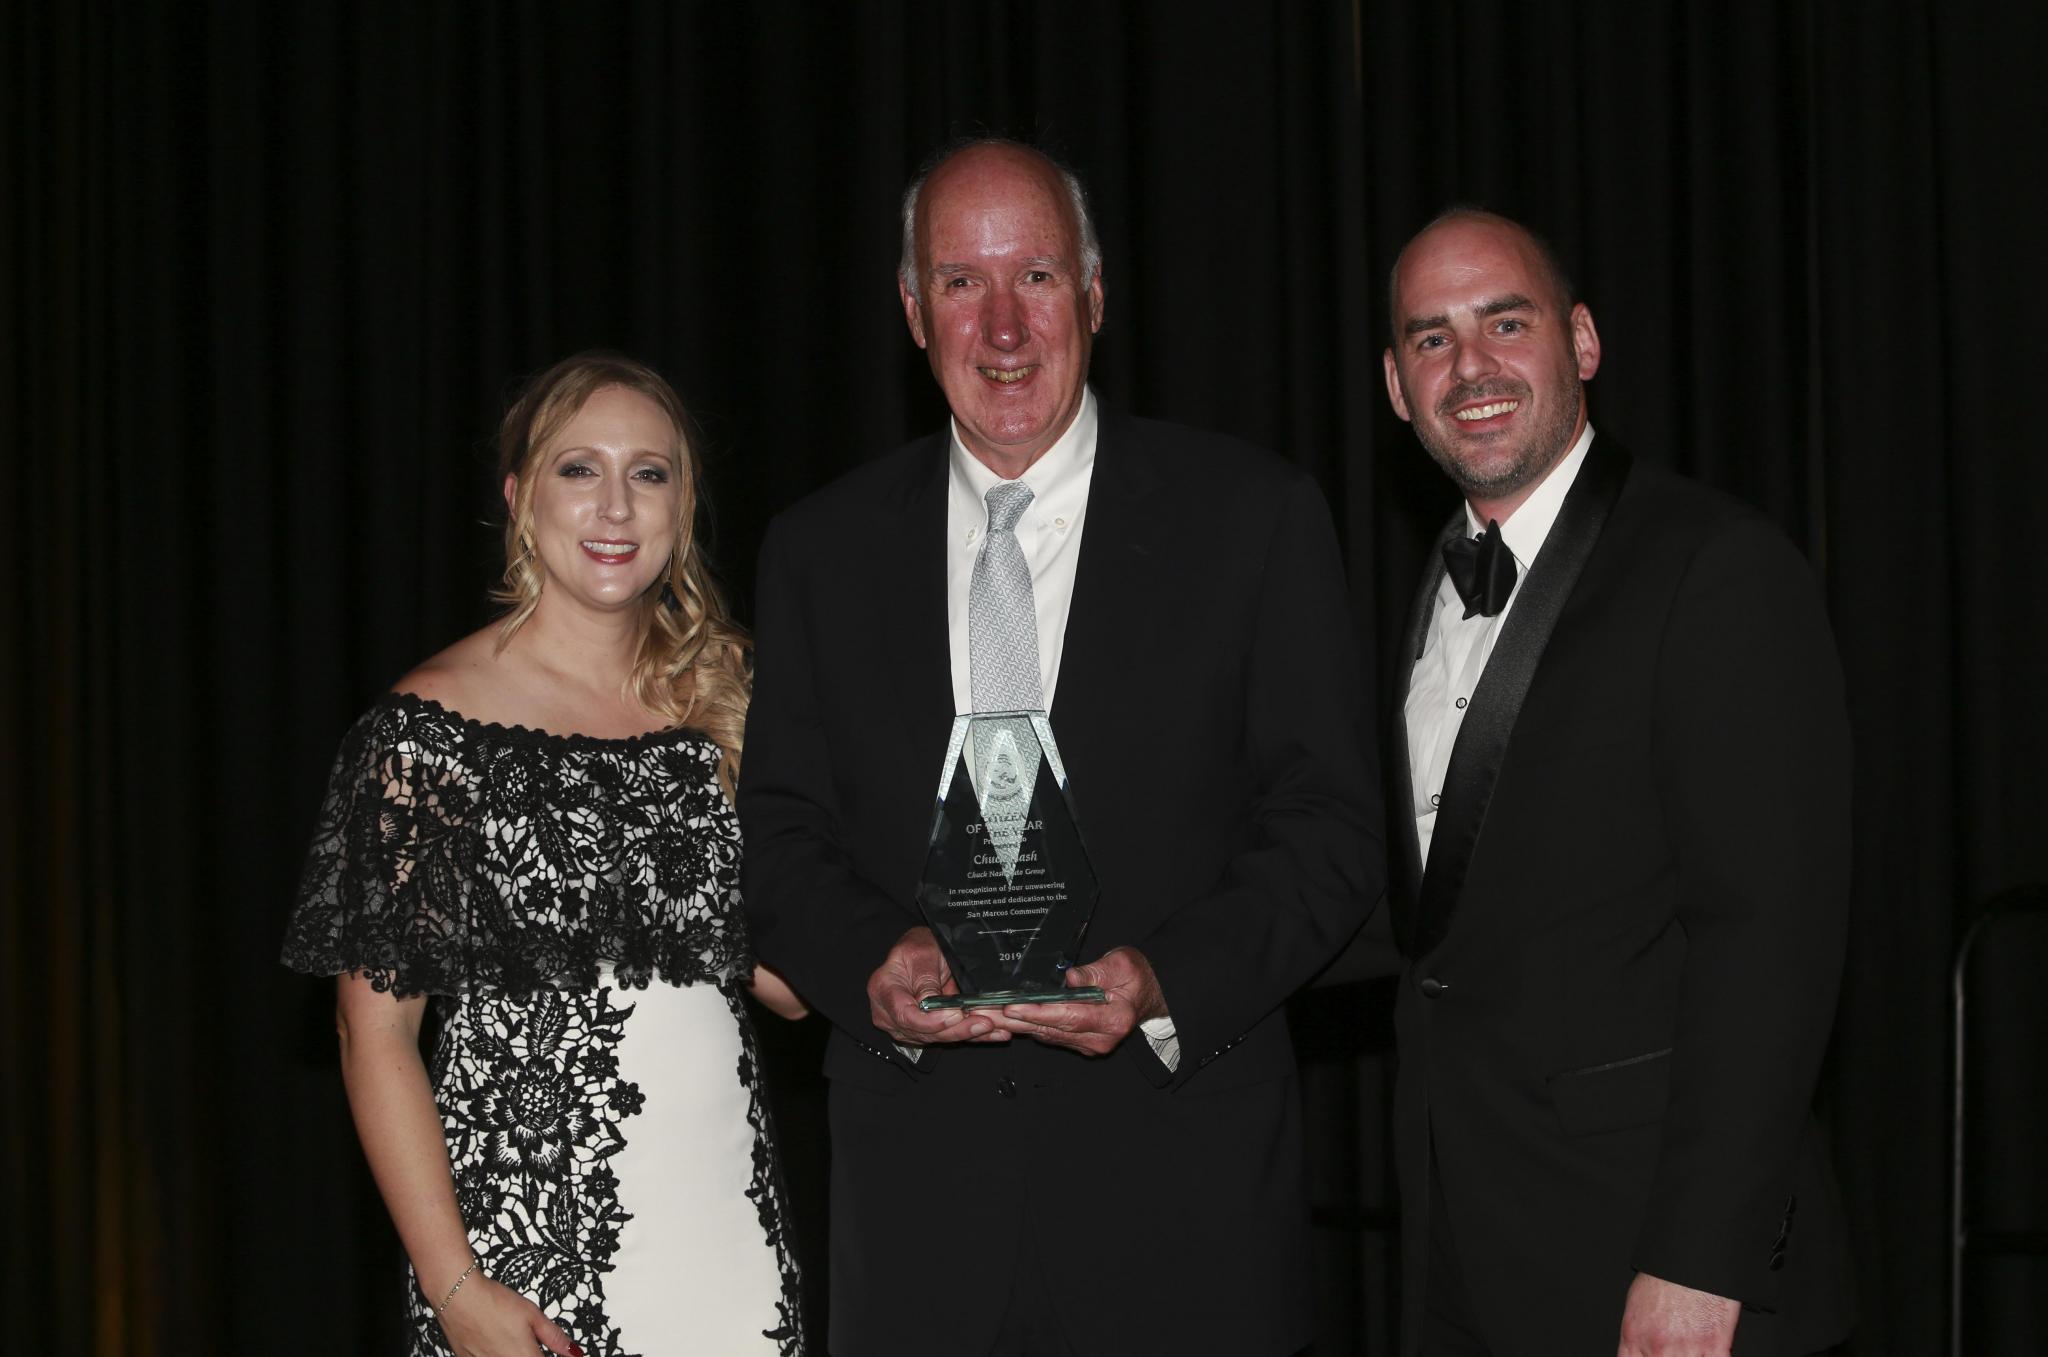 Chuck Nash was honored with the chamber’s Citizen of the Year award.